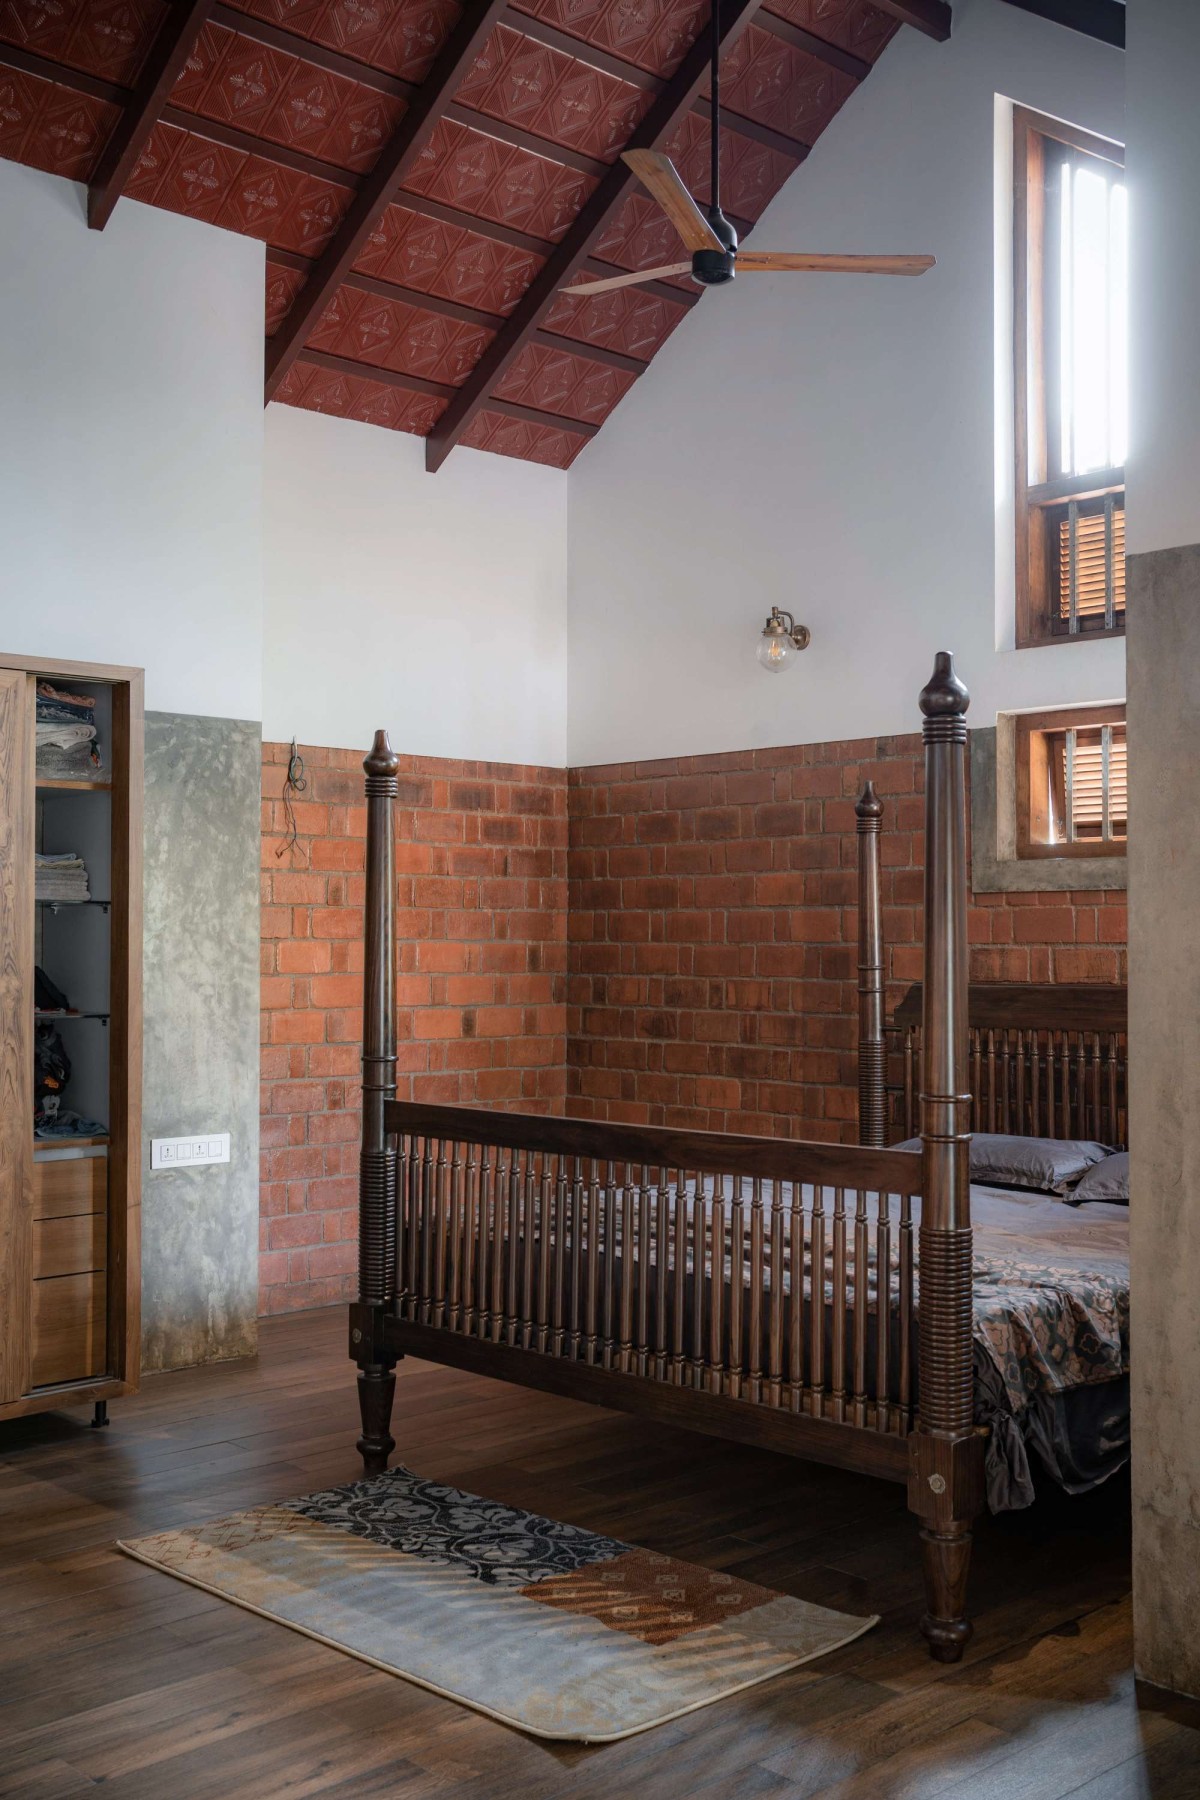 Bedroom of Earthen Penchant by Designature Architects